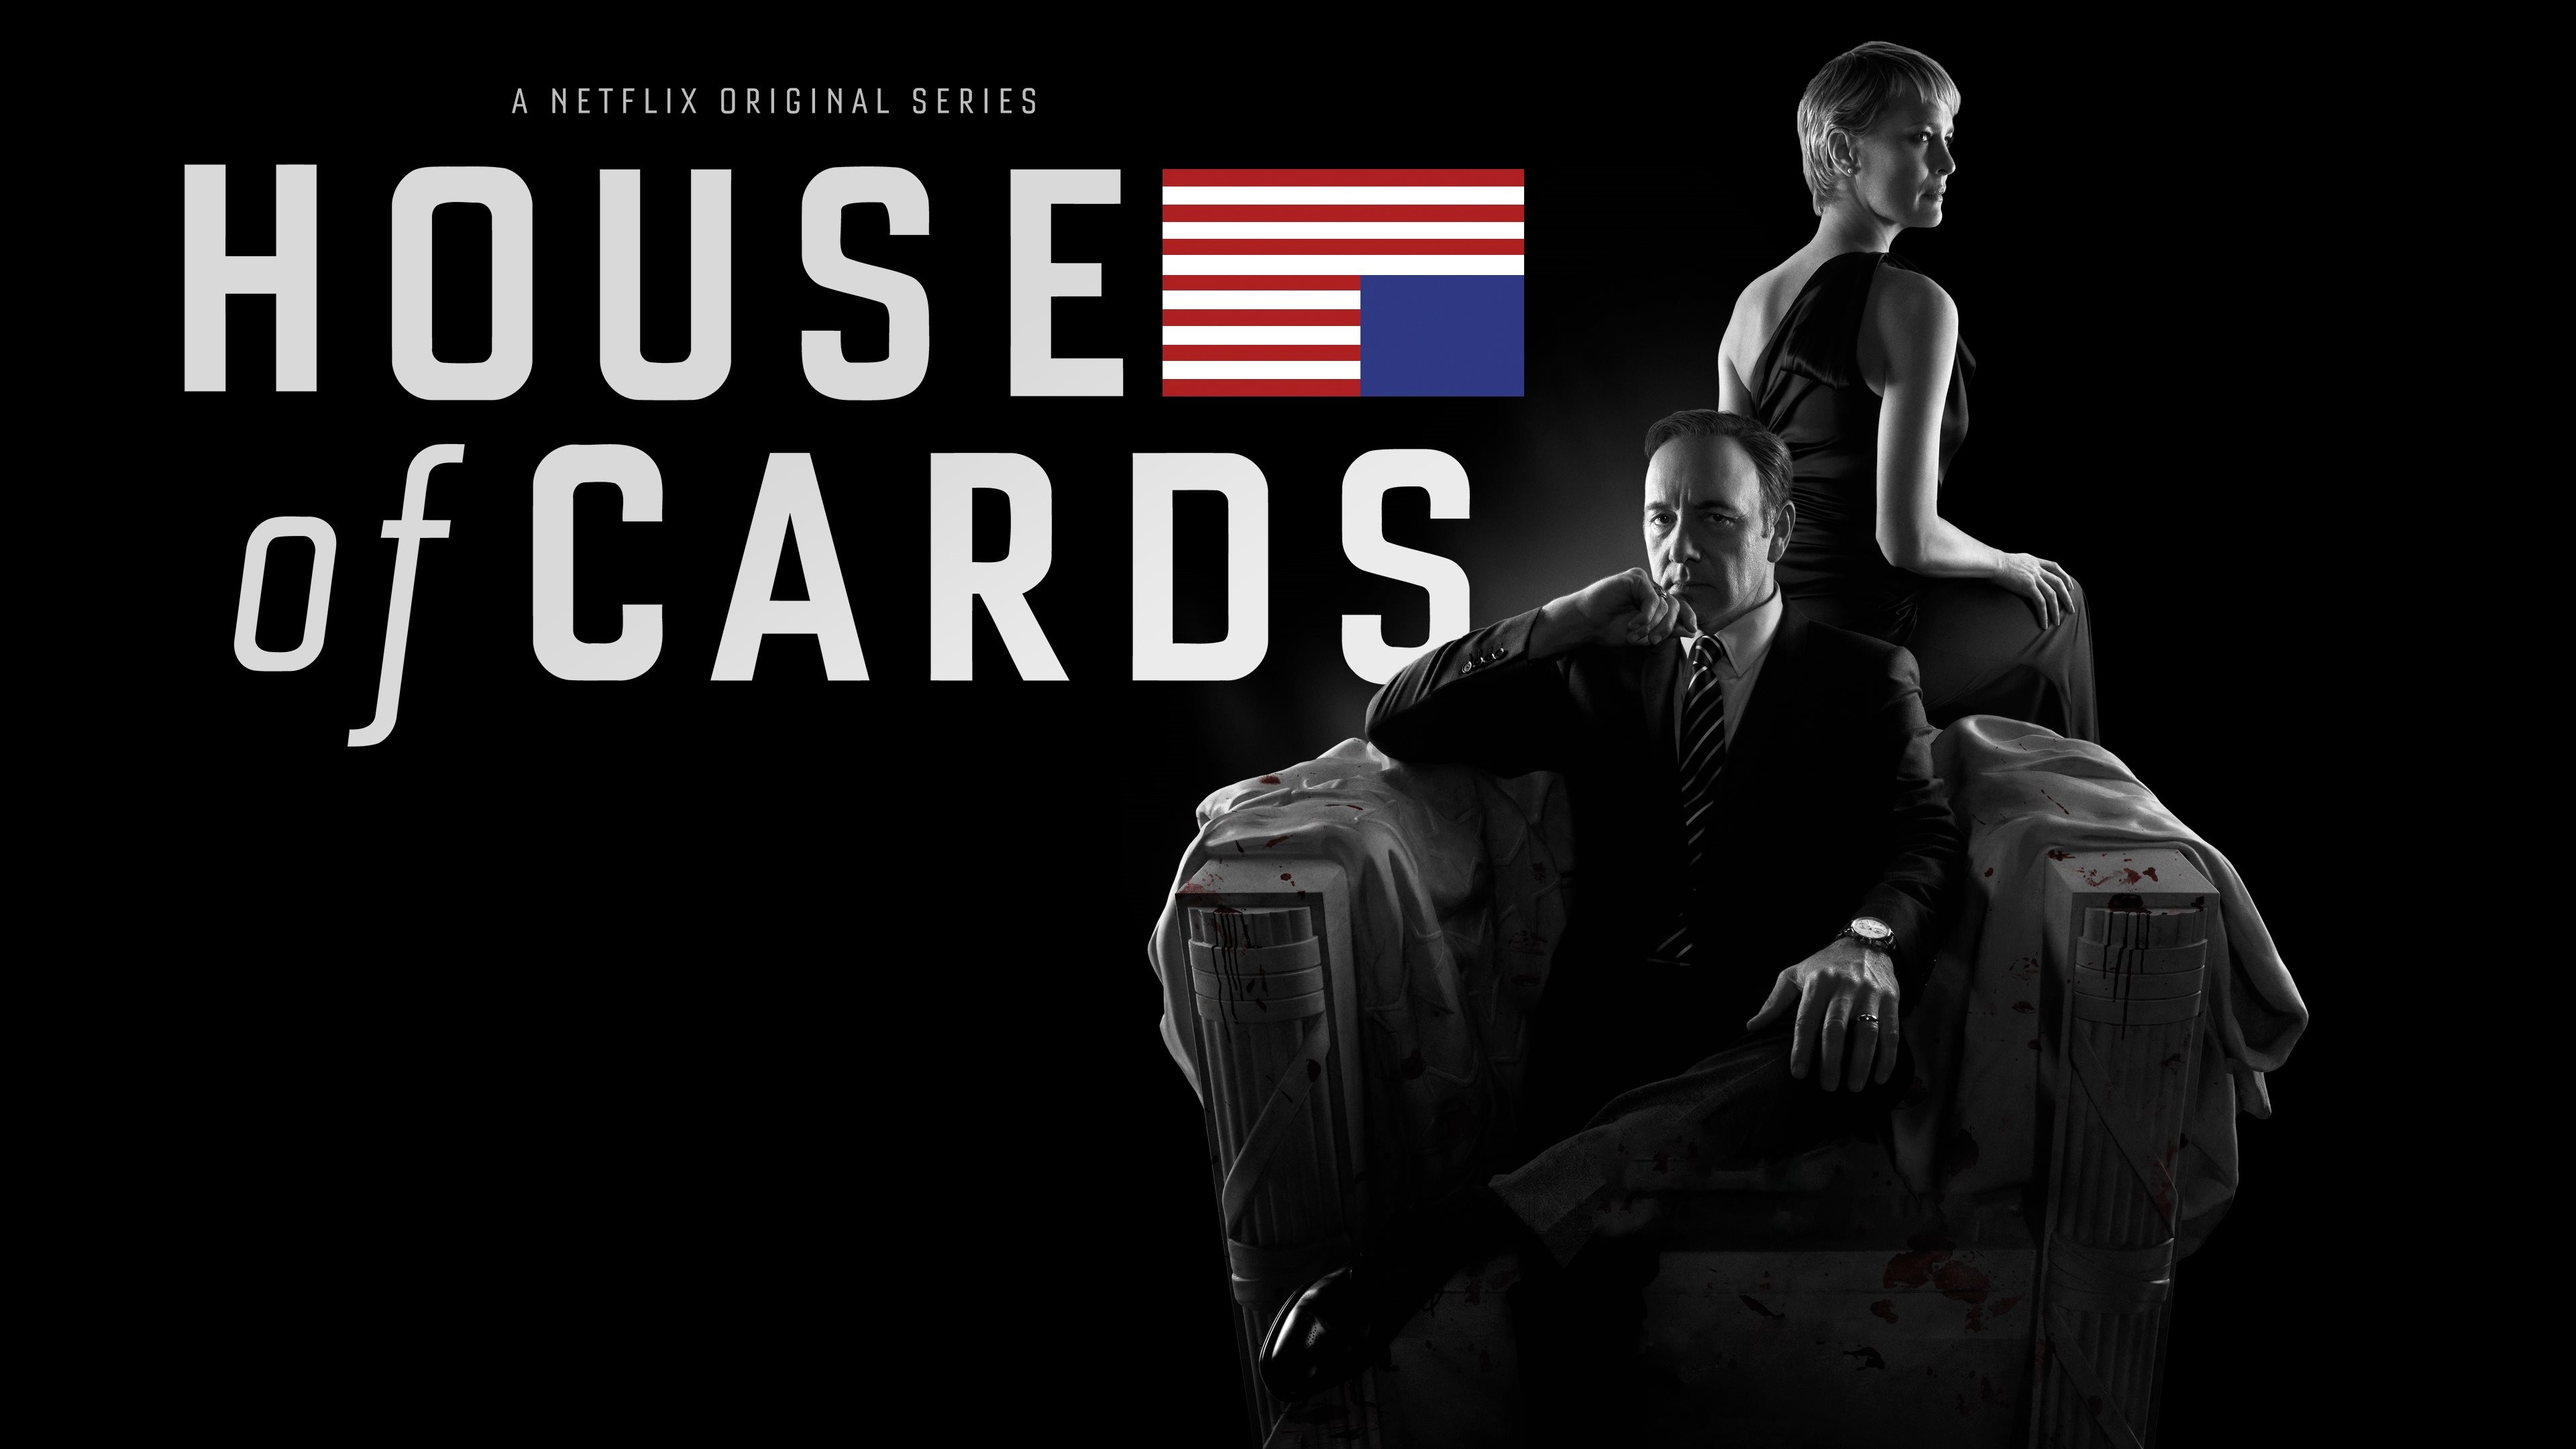 Frank Underwood, Kevin Spacey, Robin Wright, Claire Underwood, Sitting, Couple, House of Cards, American flag, Netflix, Black background, TV Wallpaper